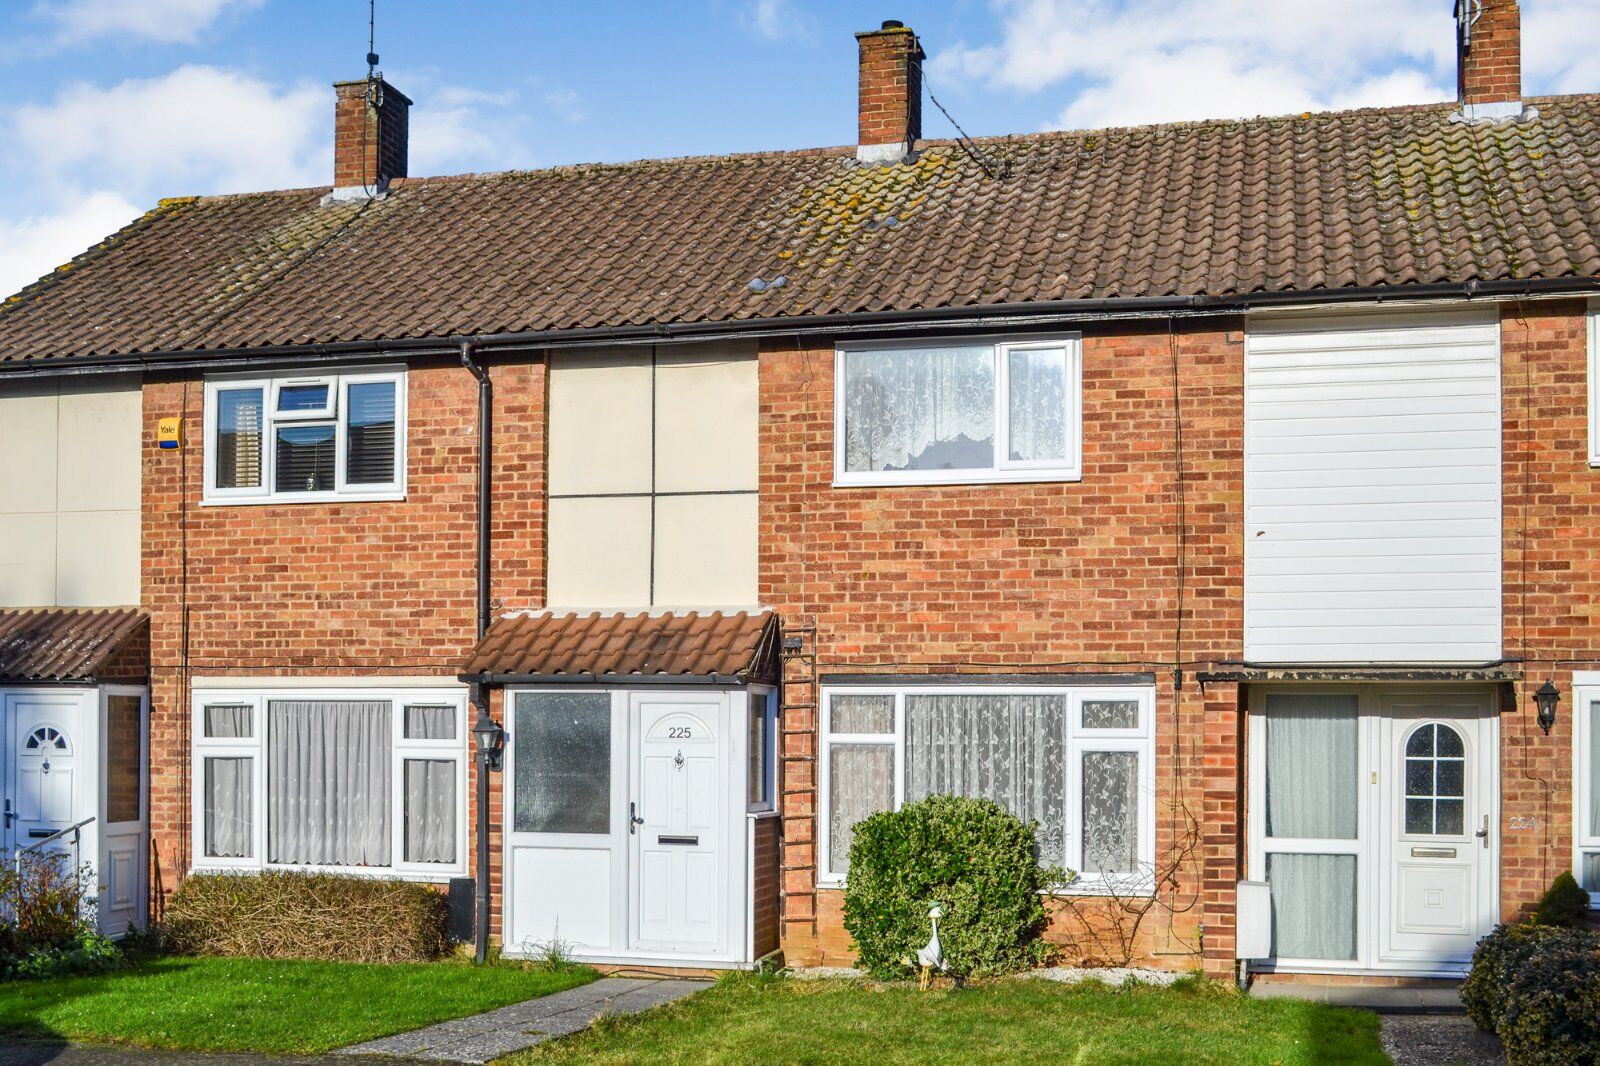 2 bedroom mid terraced house for sale Halling Hill, Harlow, CM20, main image